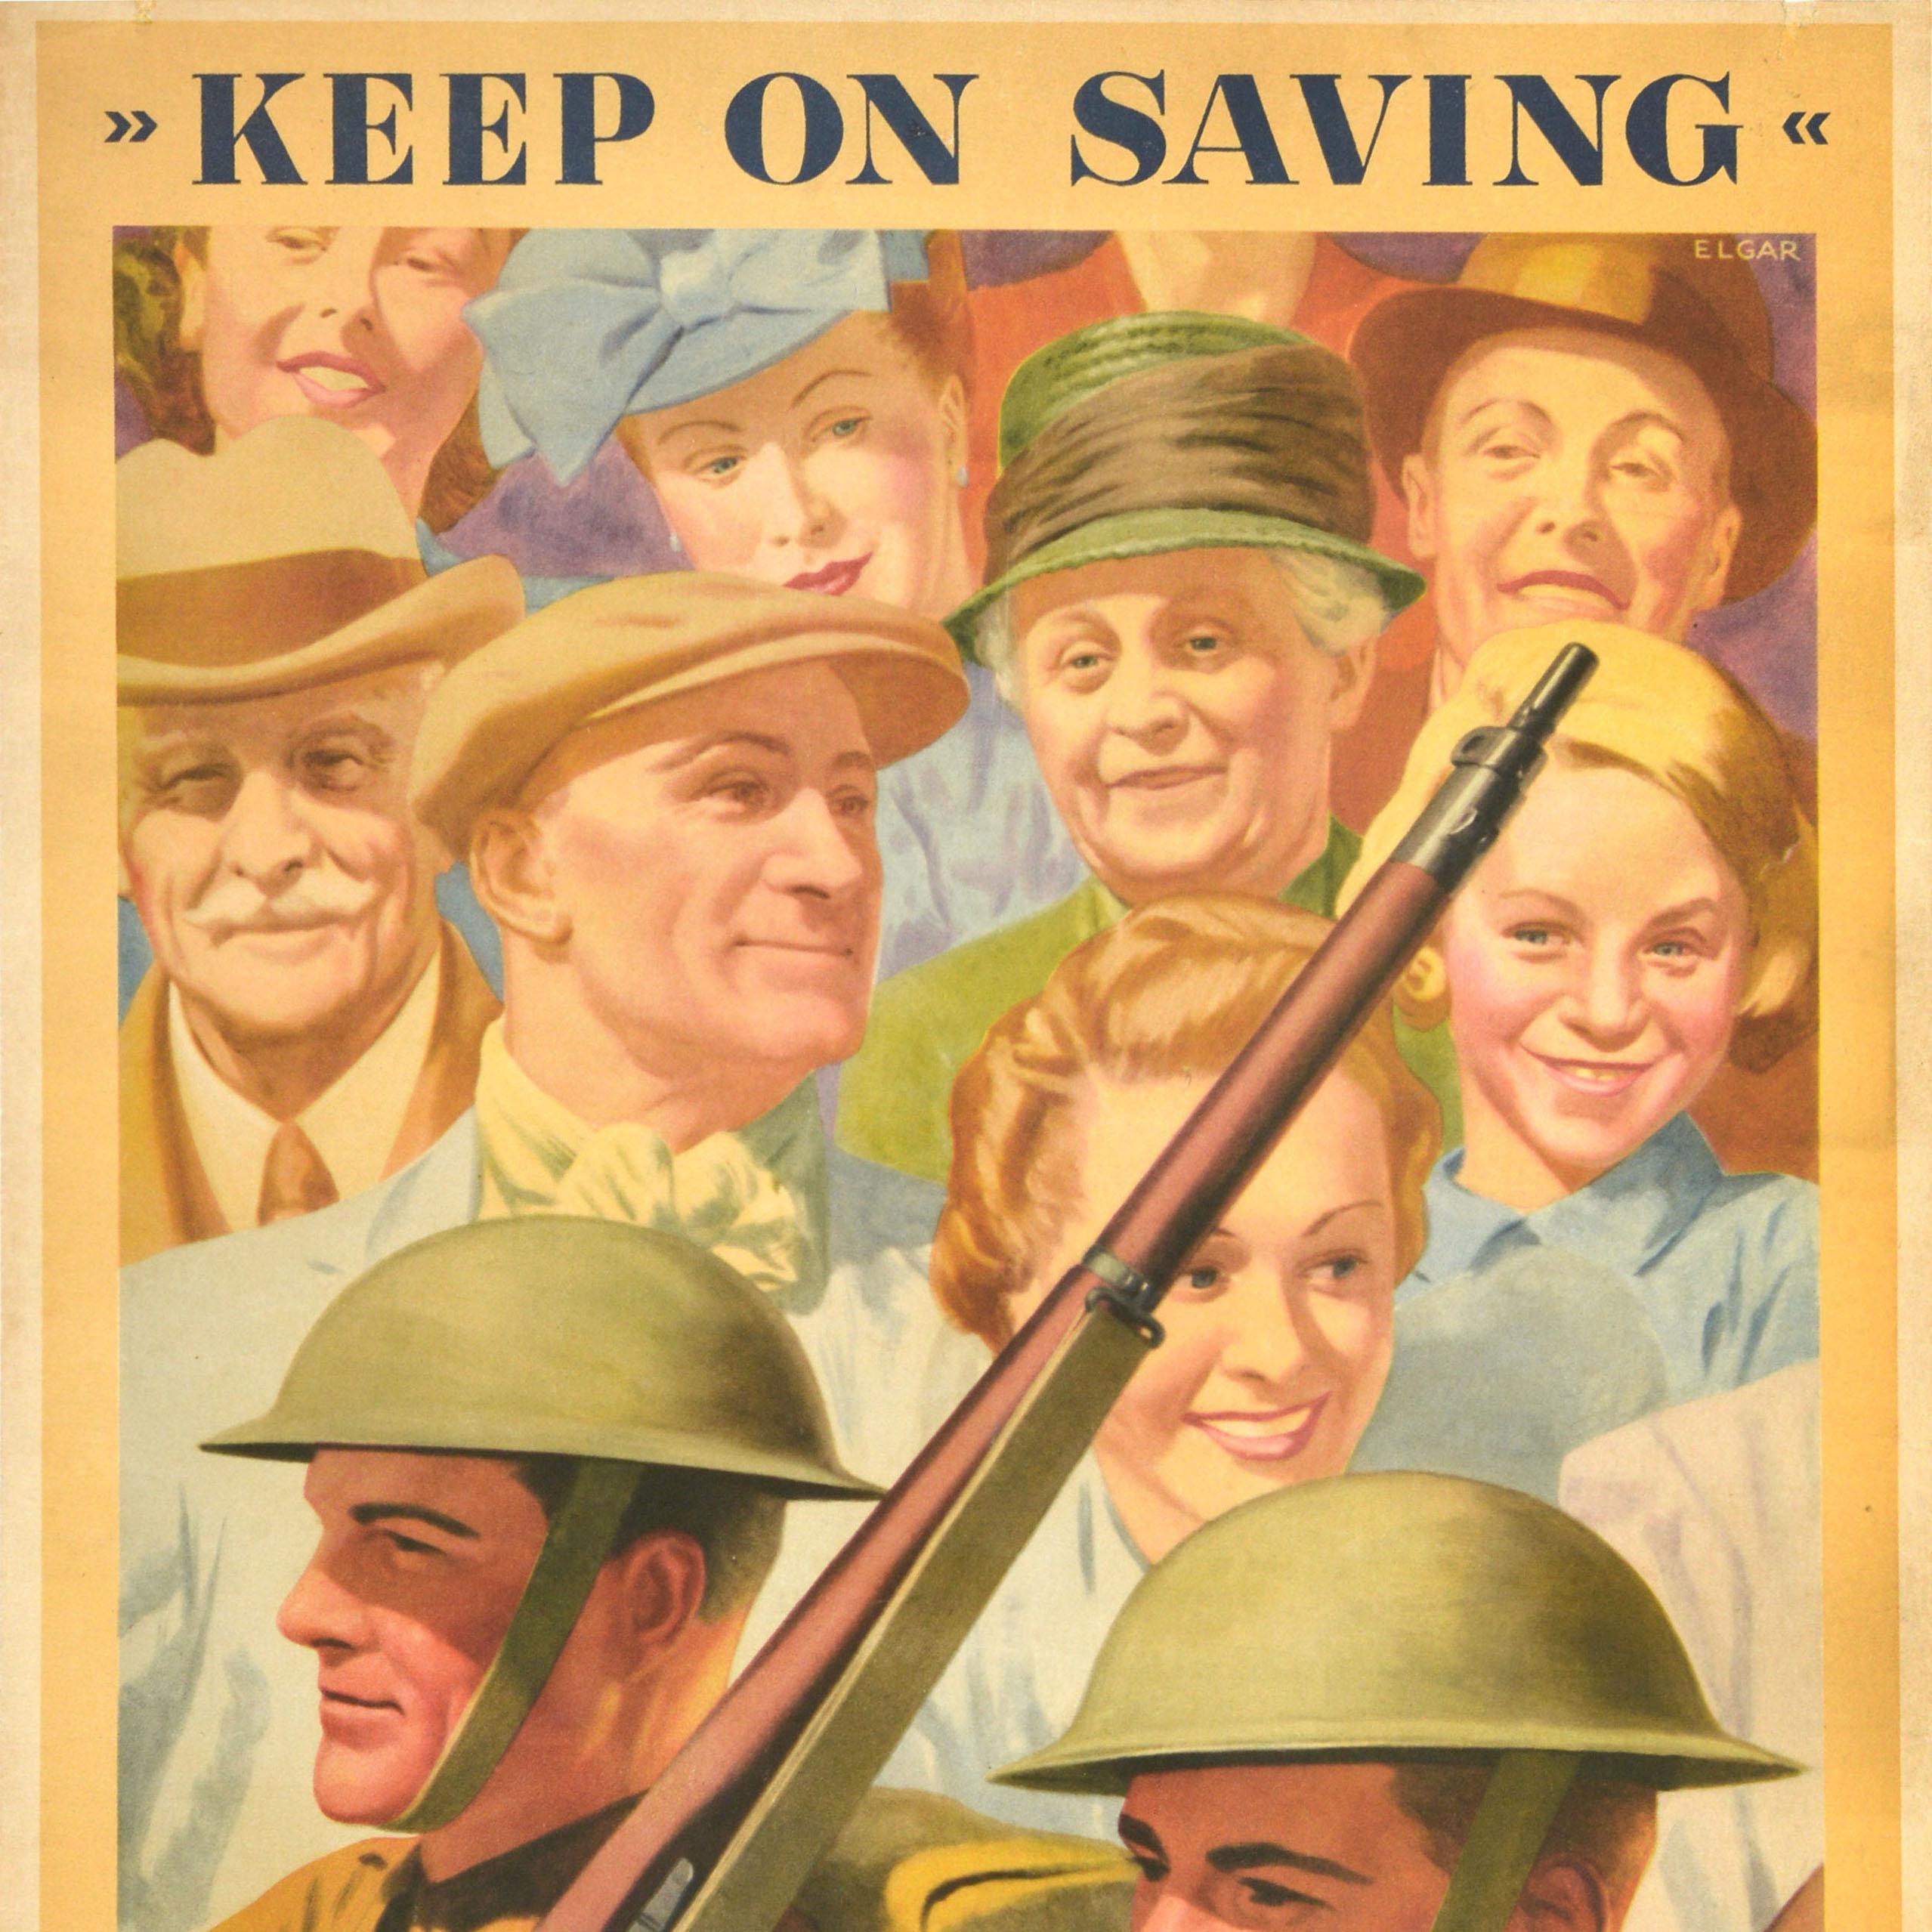 Original vintage World War Two National Savings home front poster - Keep on Saving Salute the Soldier - featuring an image of soldiers in uniform marching with rifle guns on their shoulders in front of a crowd of smiling people supporting them, the